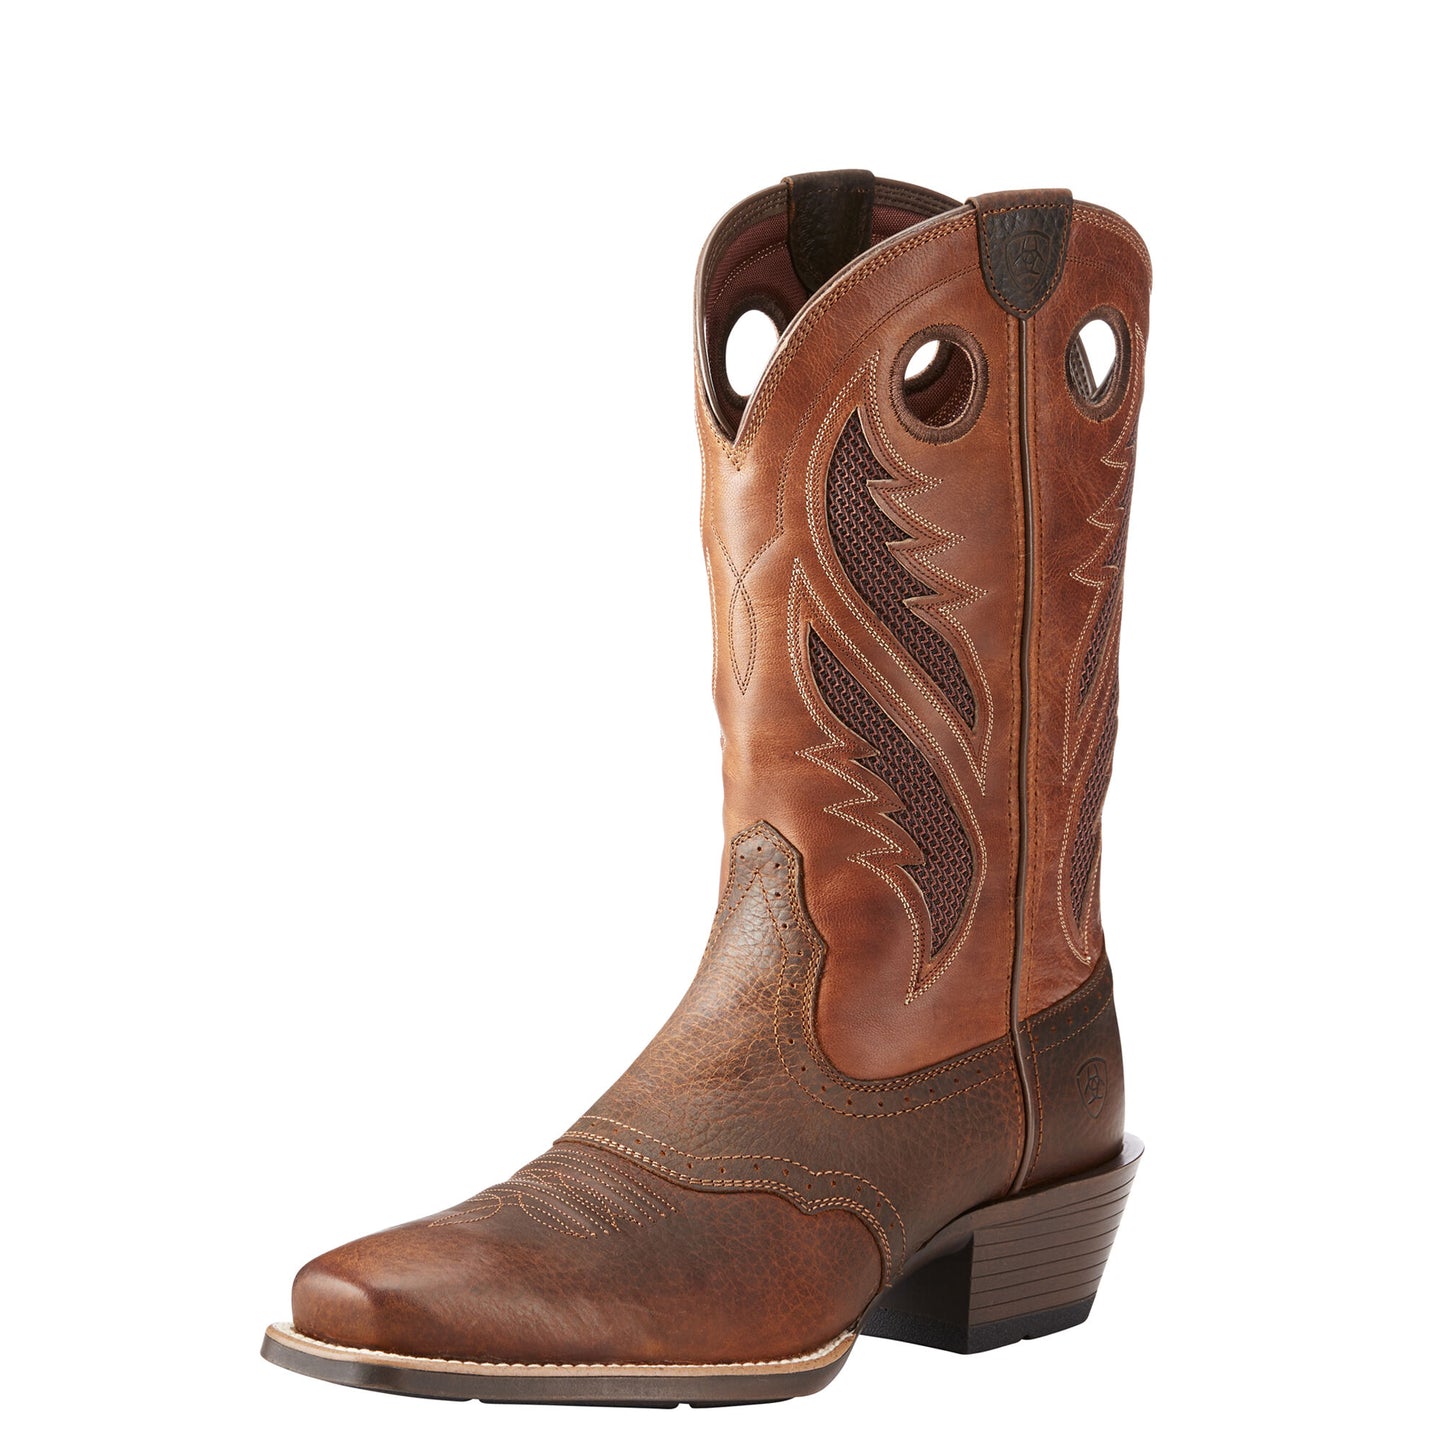 Ariat Men's VentTek Roughstock Cowboy Boot - Brown Oiled Rowdy - French's Boots